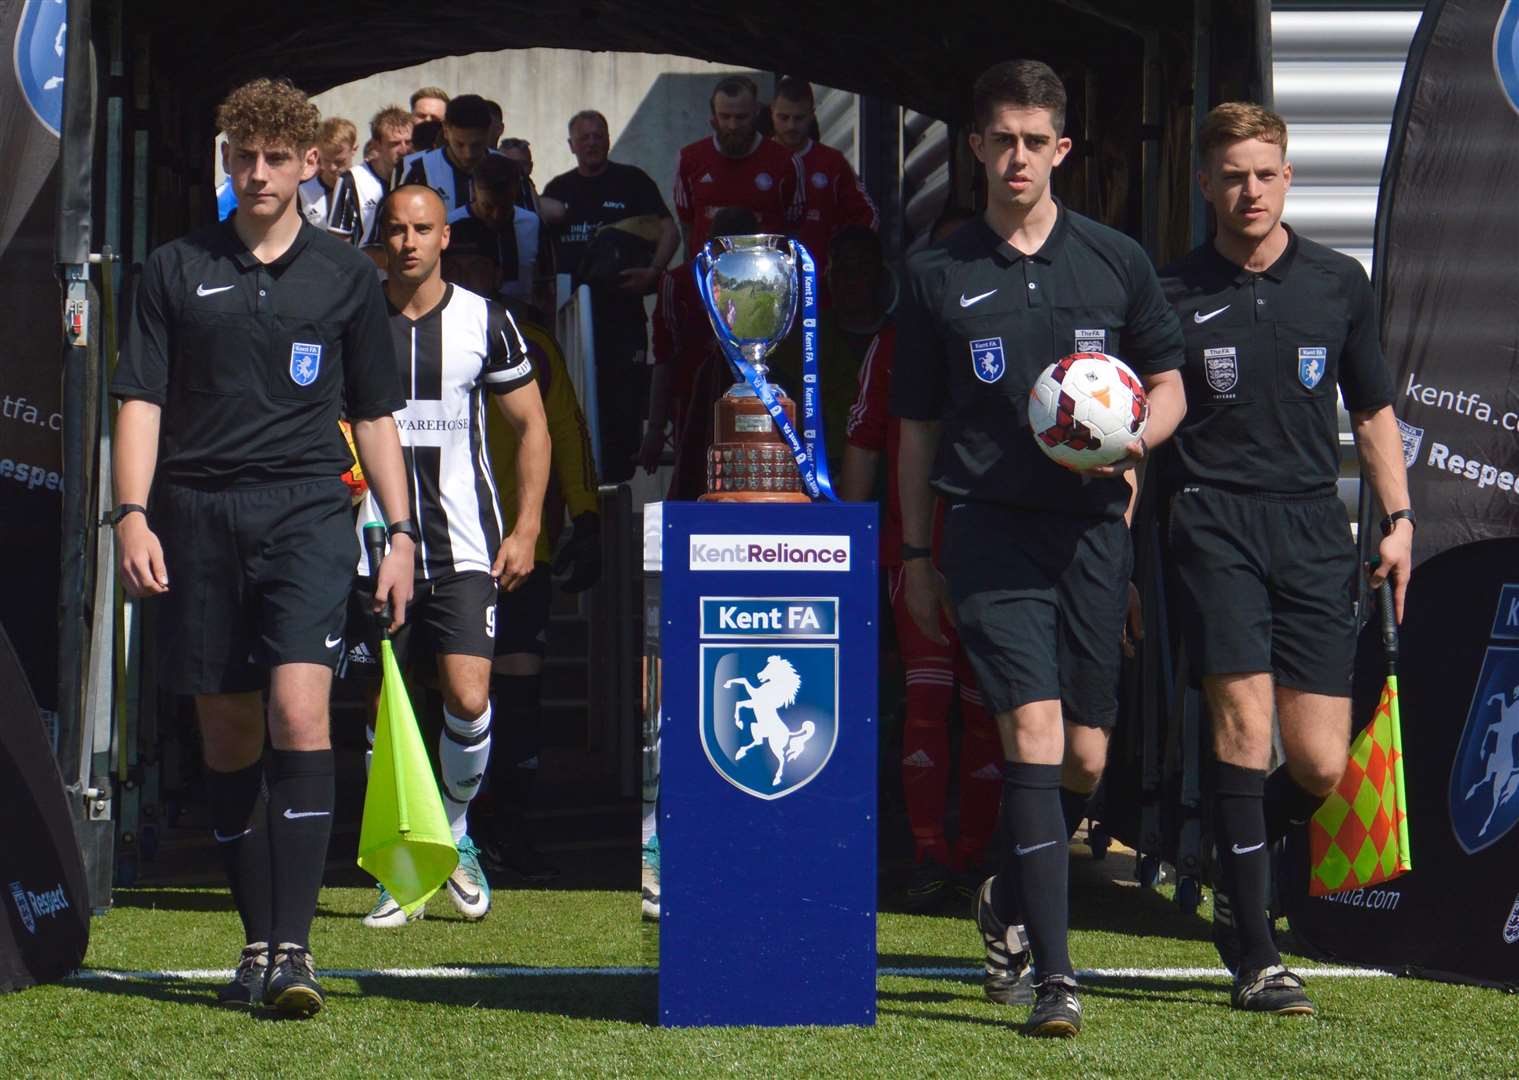 Match officials lead the teams out for a cup final at the Gallagher Stadium